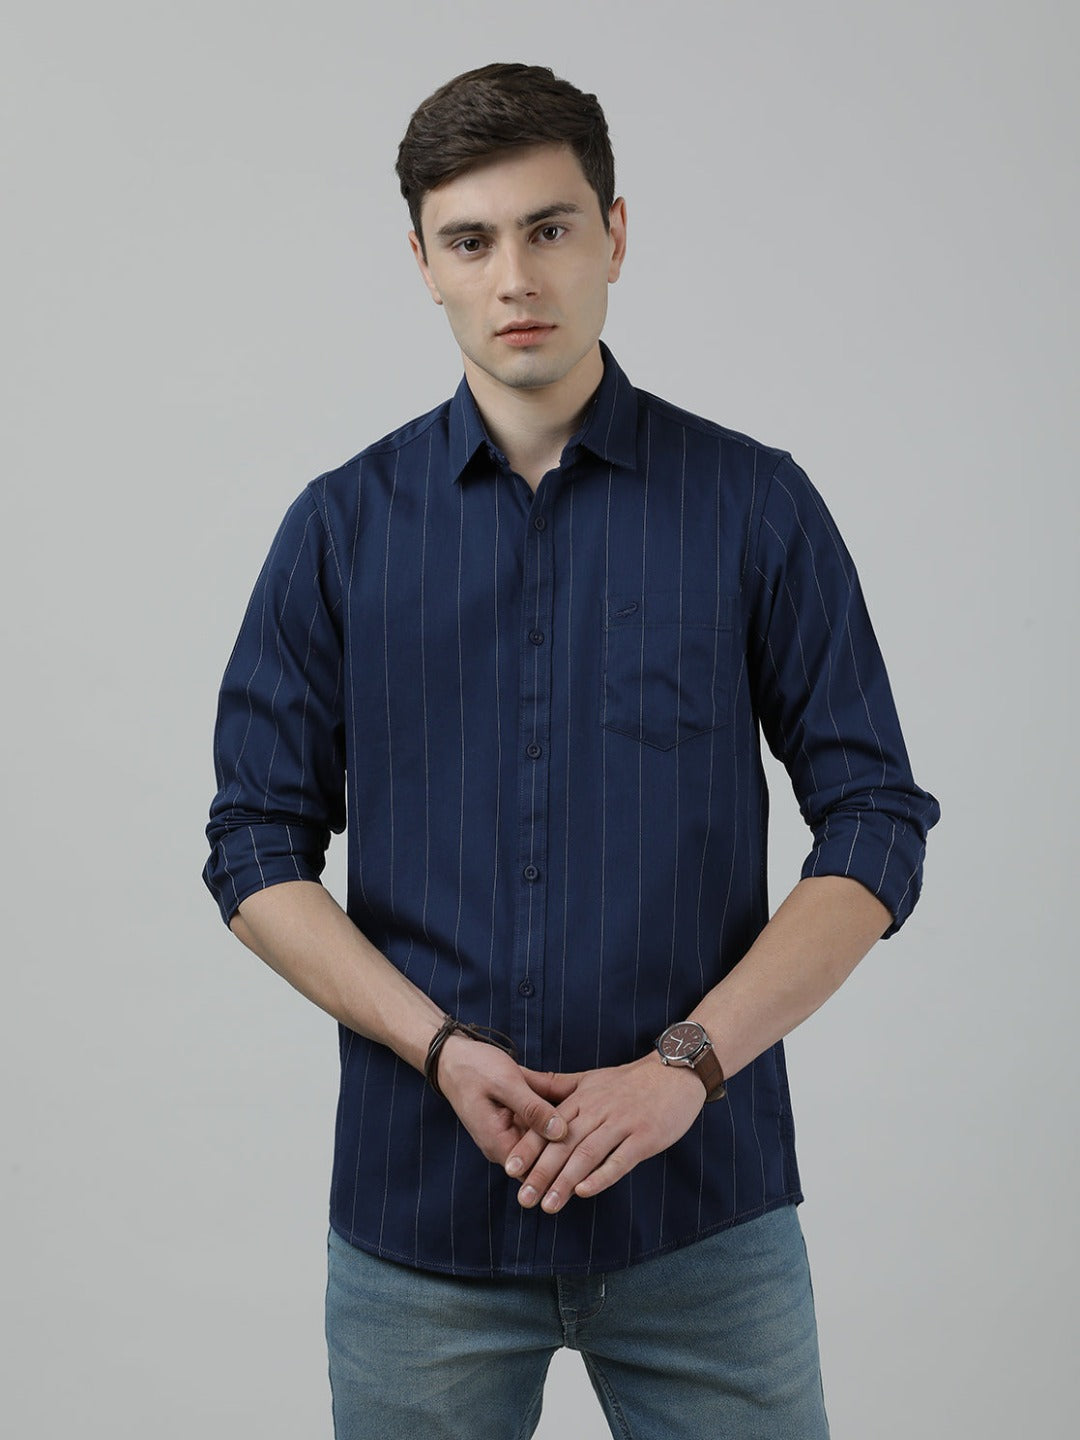 Casual Navy Full Sleeve Slim Fit Stripe Shirt with Collar for Men